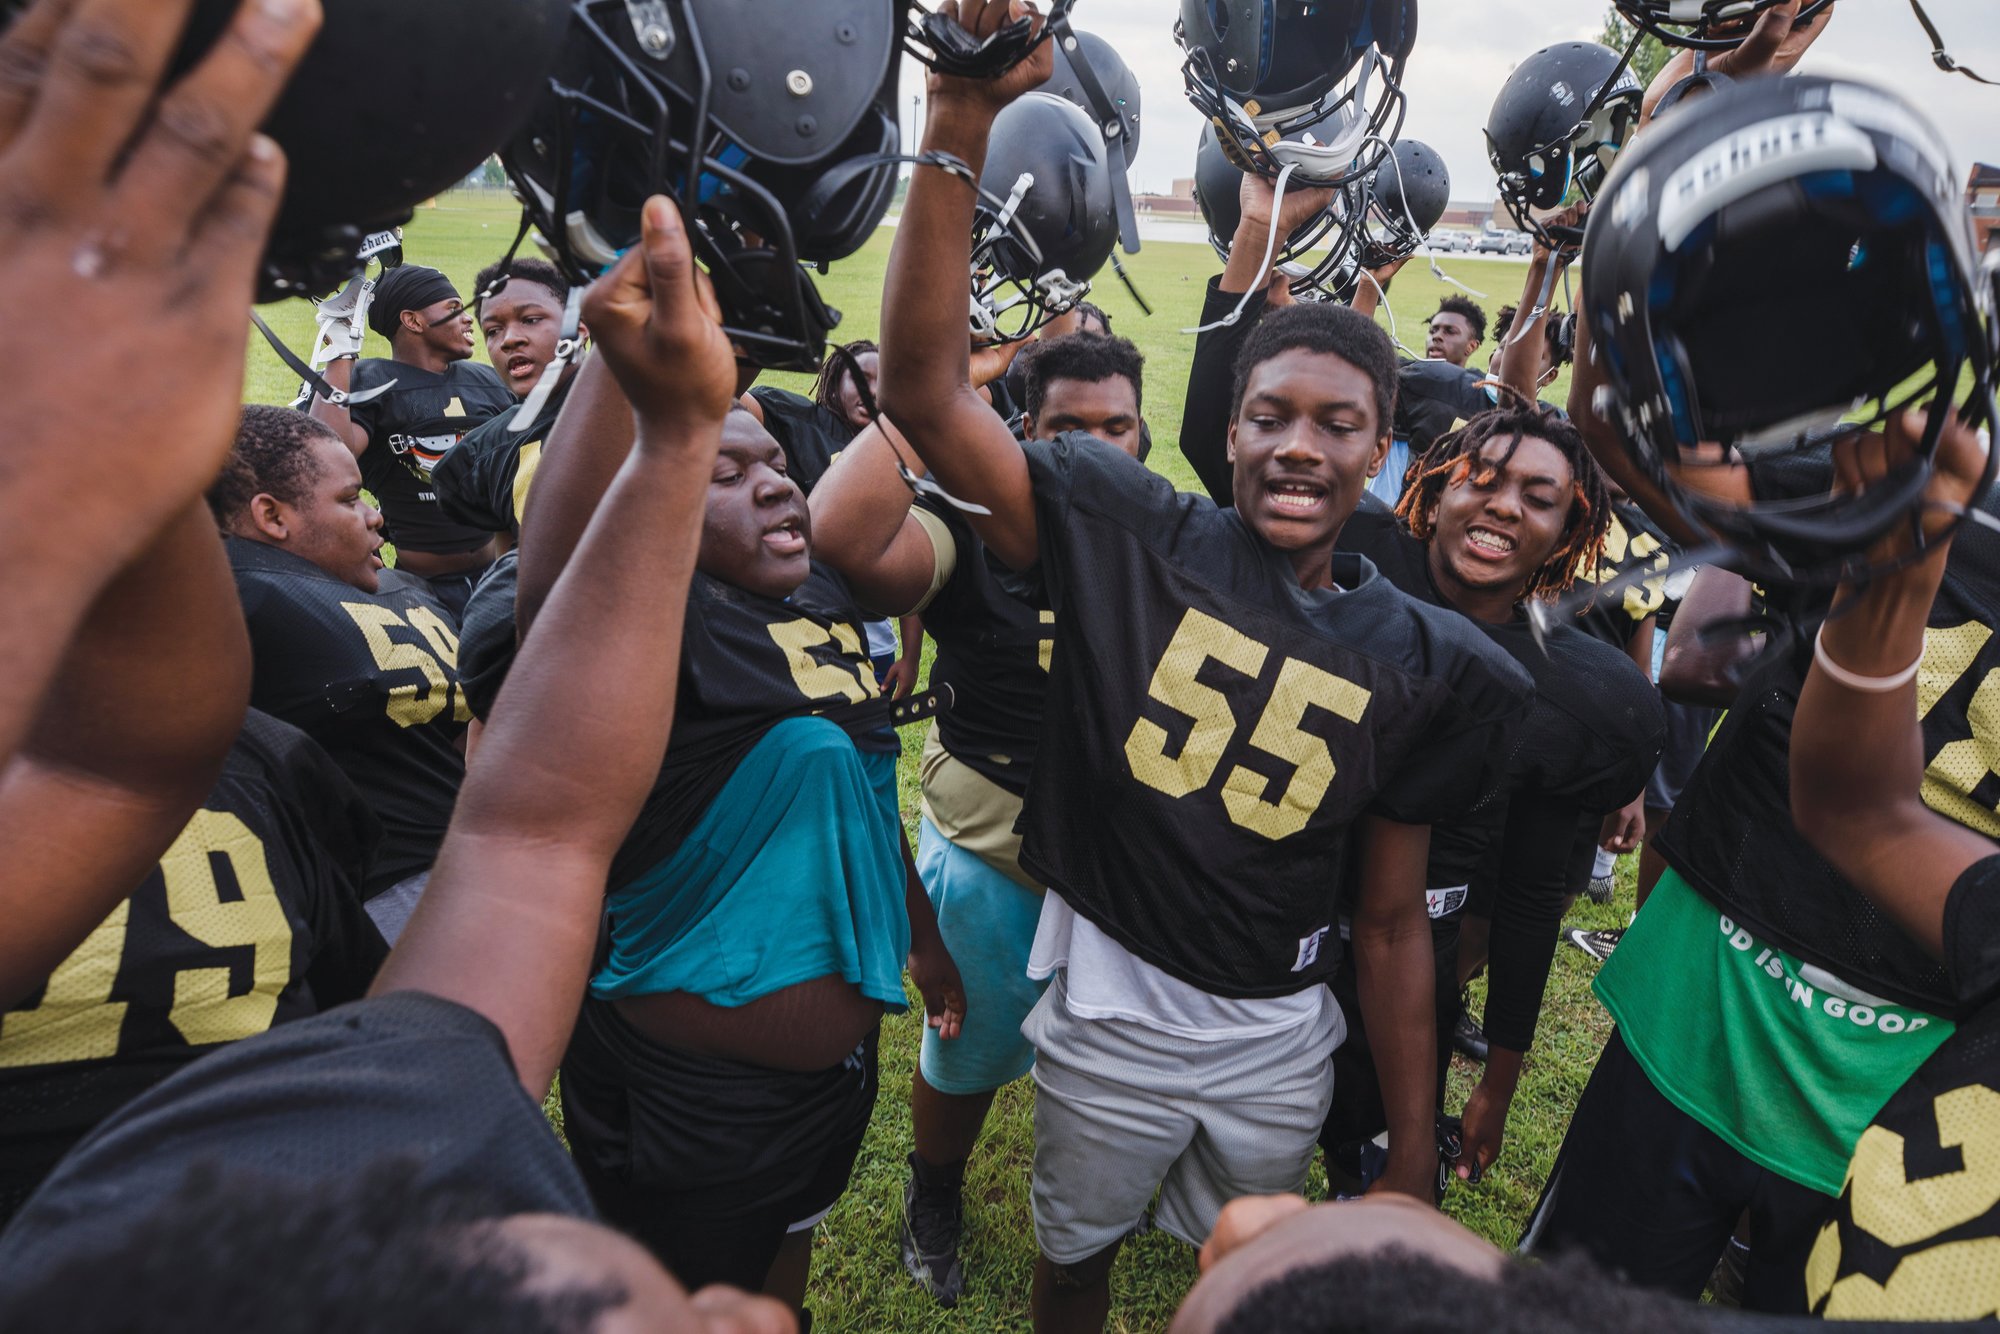 Lee Central football opens region play after two weeks off | The Sumter Item